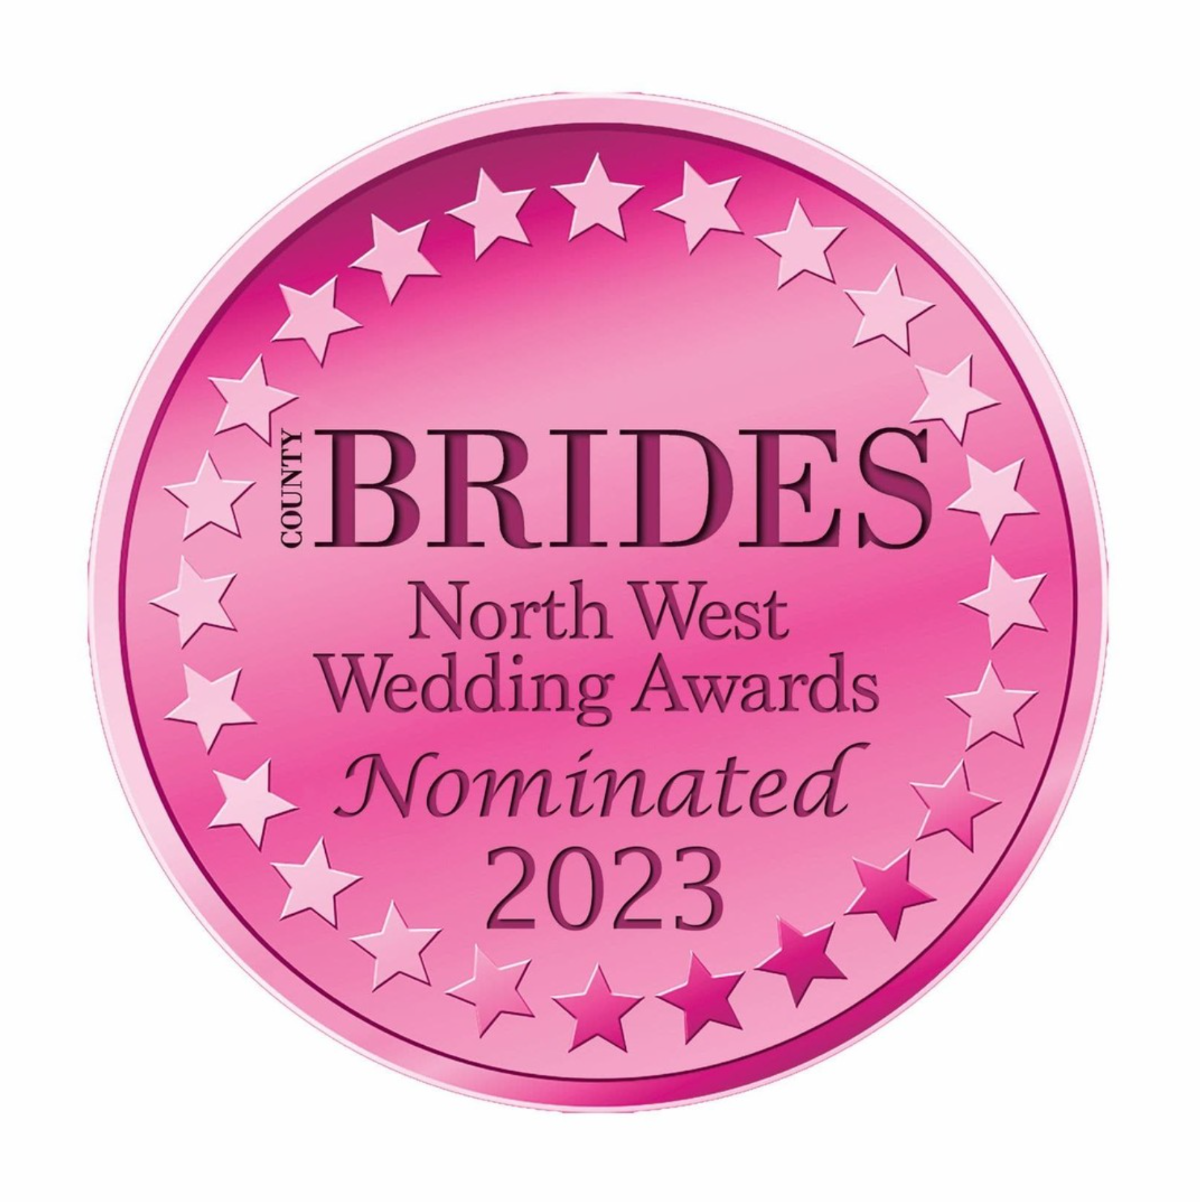 I have been nominated for the County Brides North West Wedding Award 2022 and 2023. 